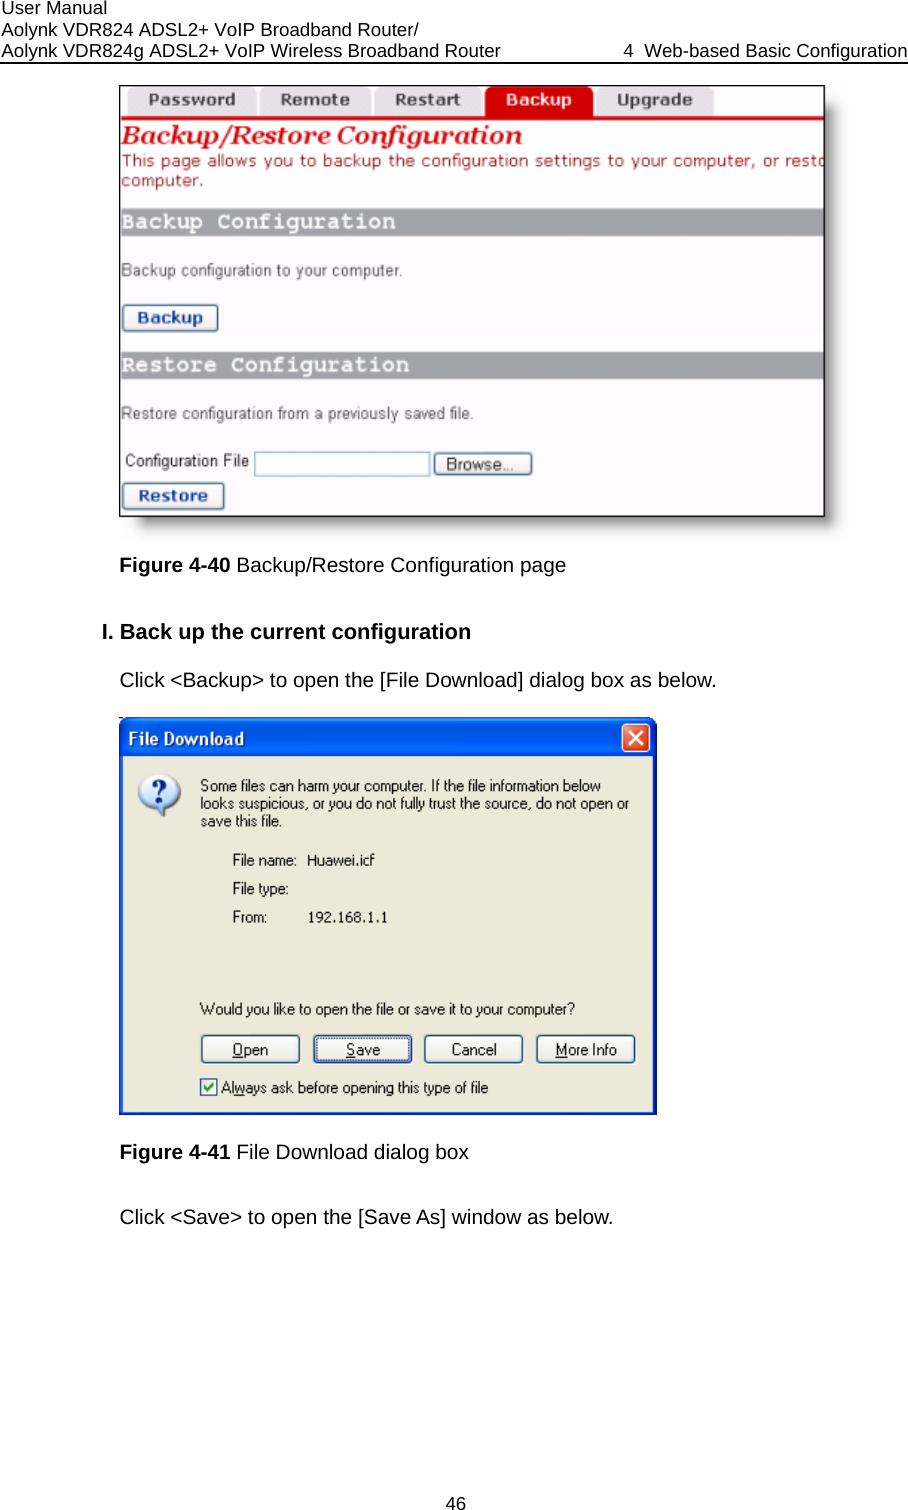 User Manual Aolynk VDR824 ADSL2+ VoIP Broadband Router/ Aolynk VDR824g ADSL2+ VoIP Wireless Broadband Router  4  Web-based Basic Configuration 46  ration page I. Figure 4-40 Backup/Restore ConfiguBack up the current configuration Click &lt;Backup&gt; to open the [File Download] dialog box as below.  Figure 4-41 File Download dialog box Click &lt;Save&gt; to open the [Save As] window as below. 